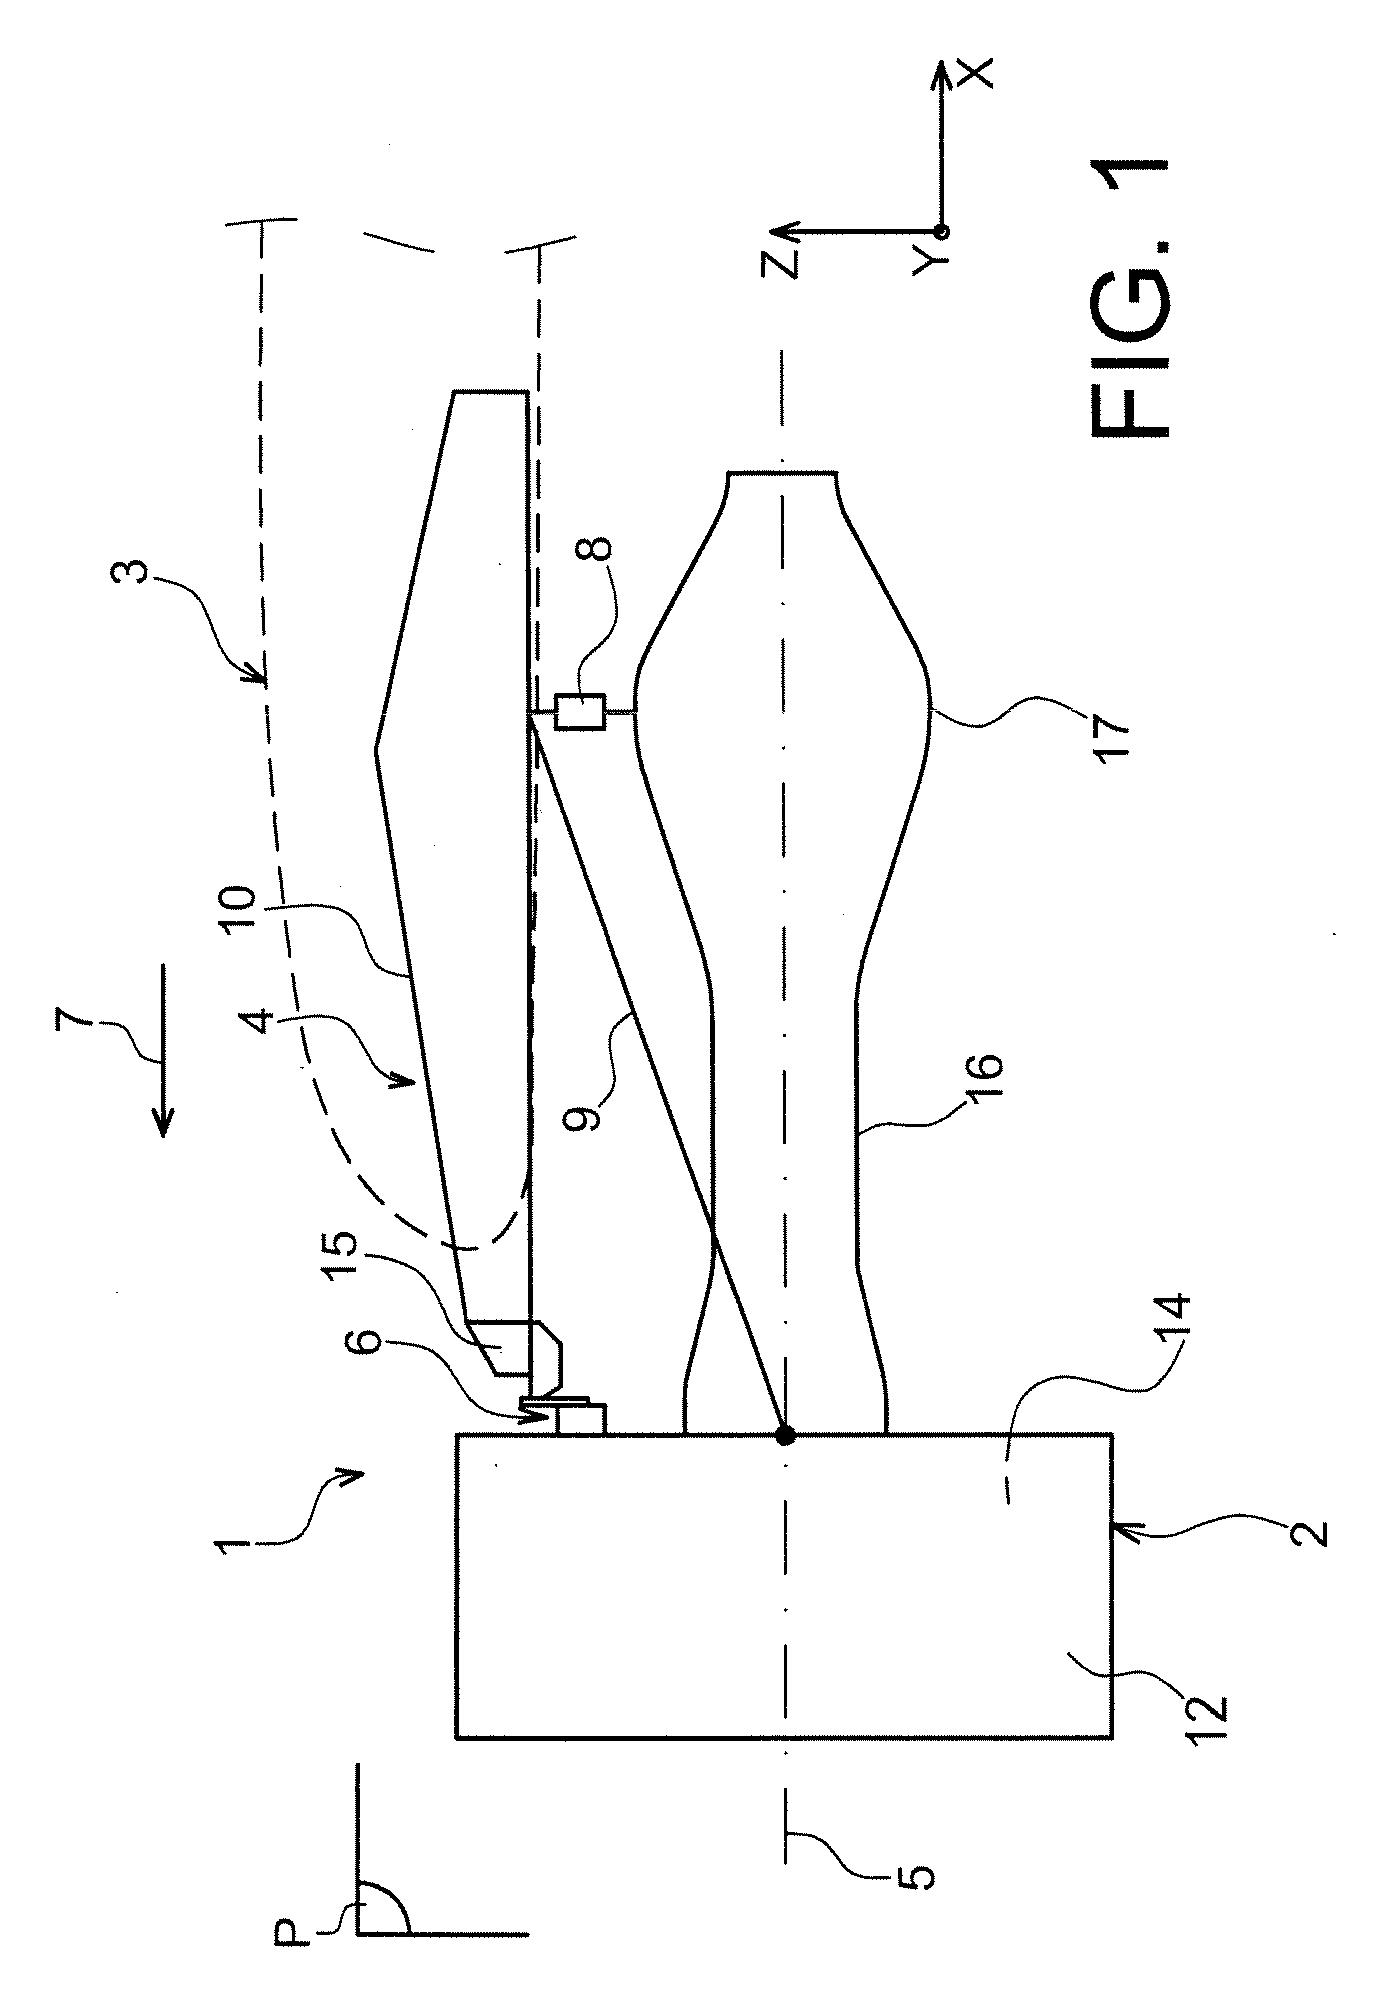 Engine Mount For an Aircraft, to be Placed Between an Engine and an Engin Mounting Structure